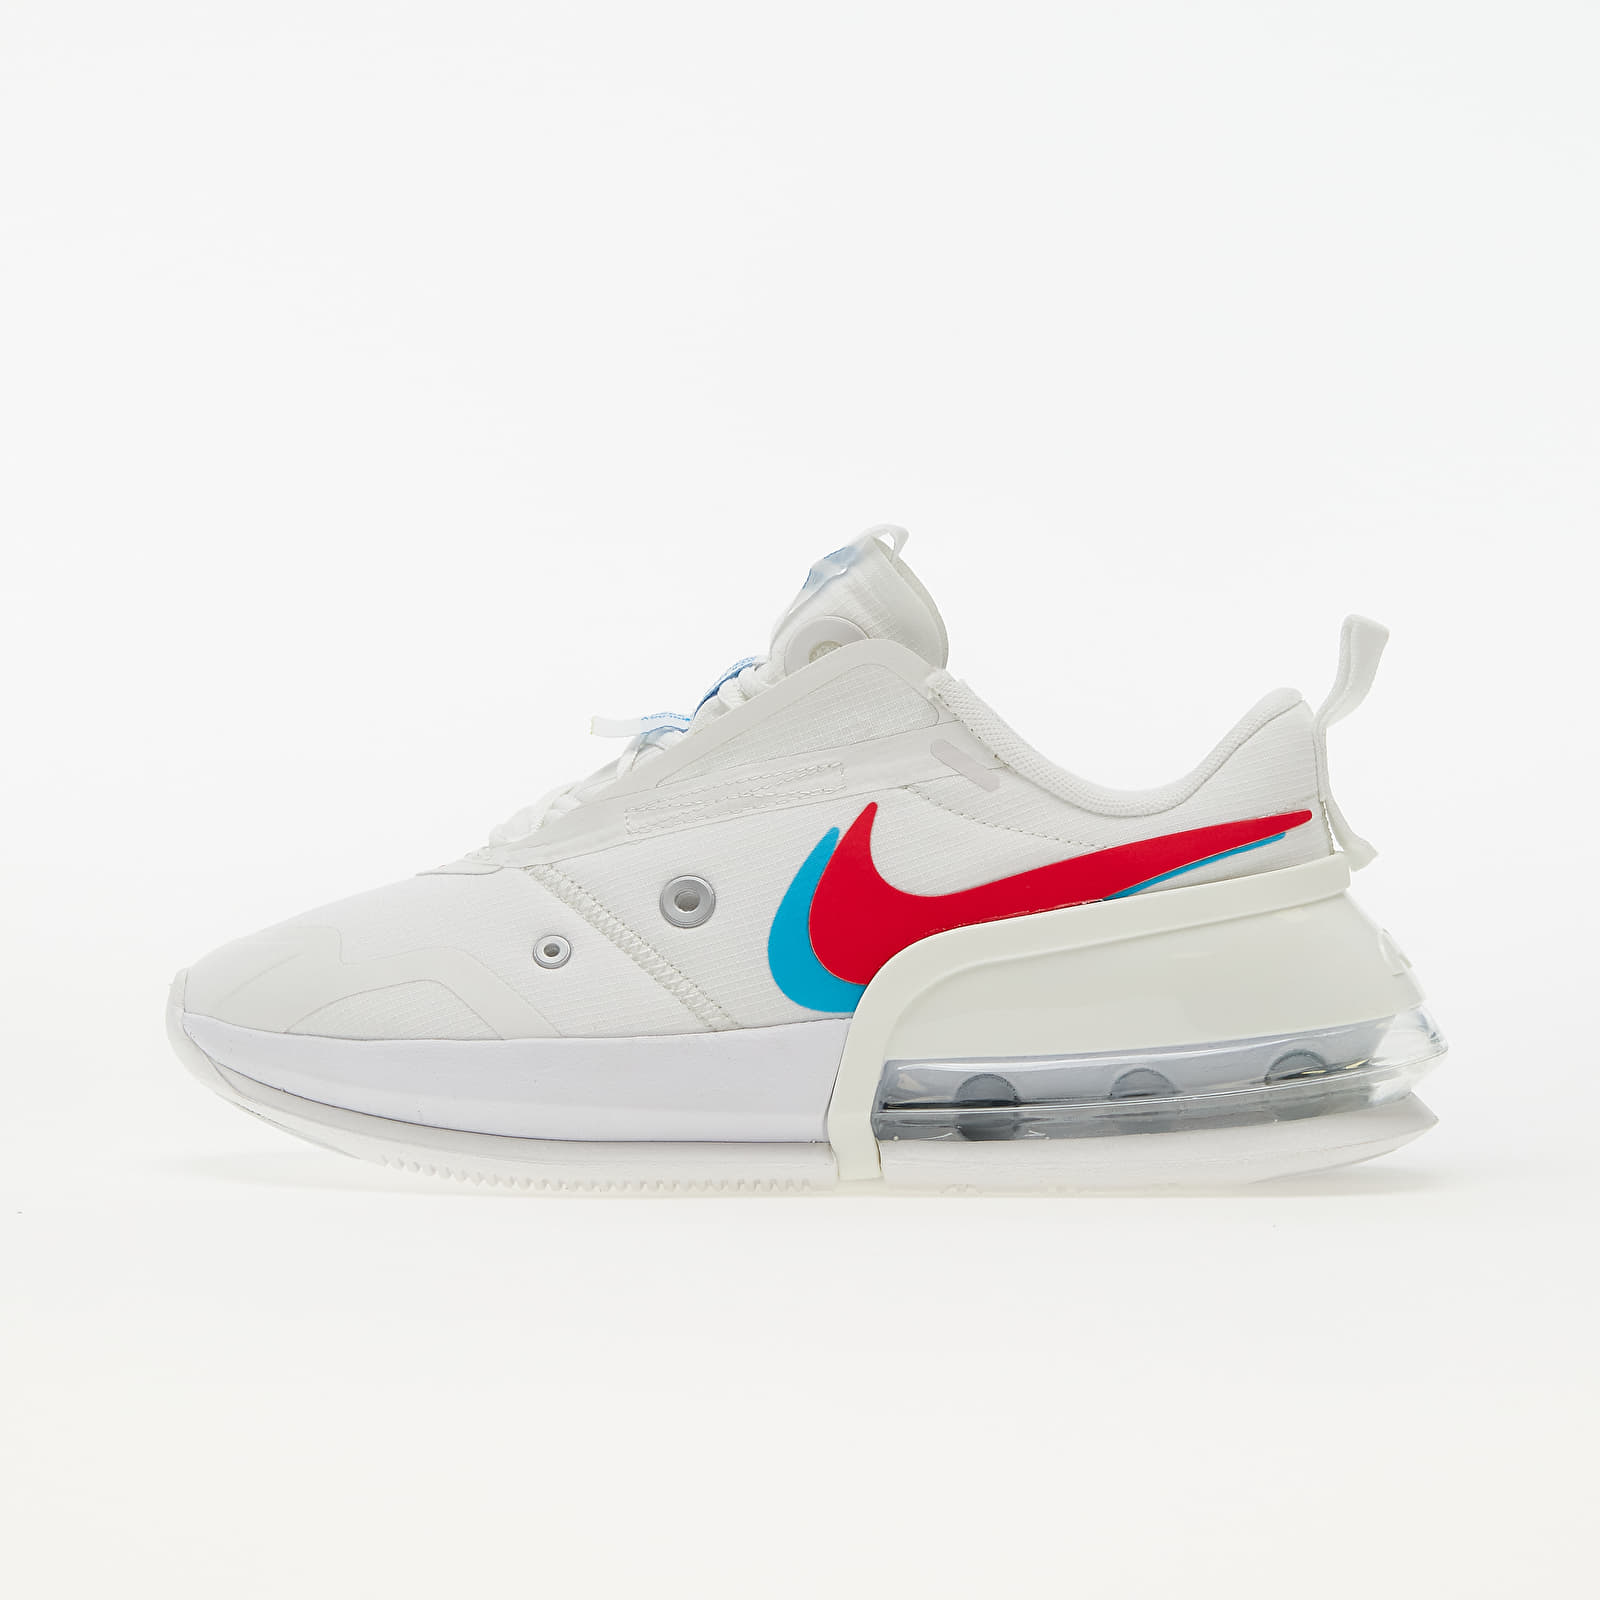 Dámske topánky a tenisky Nike W Air Max Up Summit White/ Siren Red-Chlorine Blue